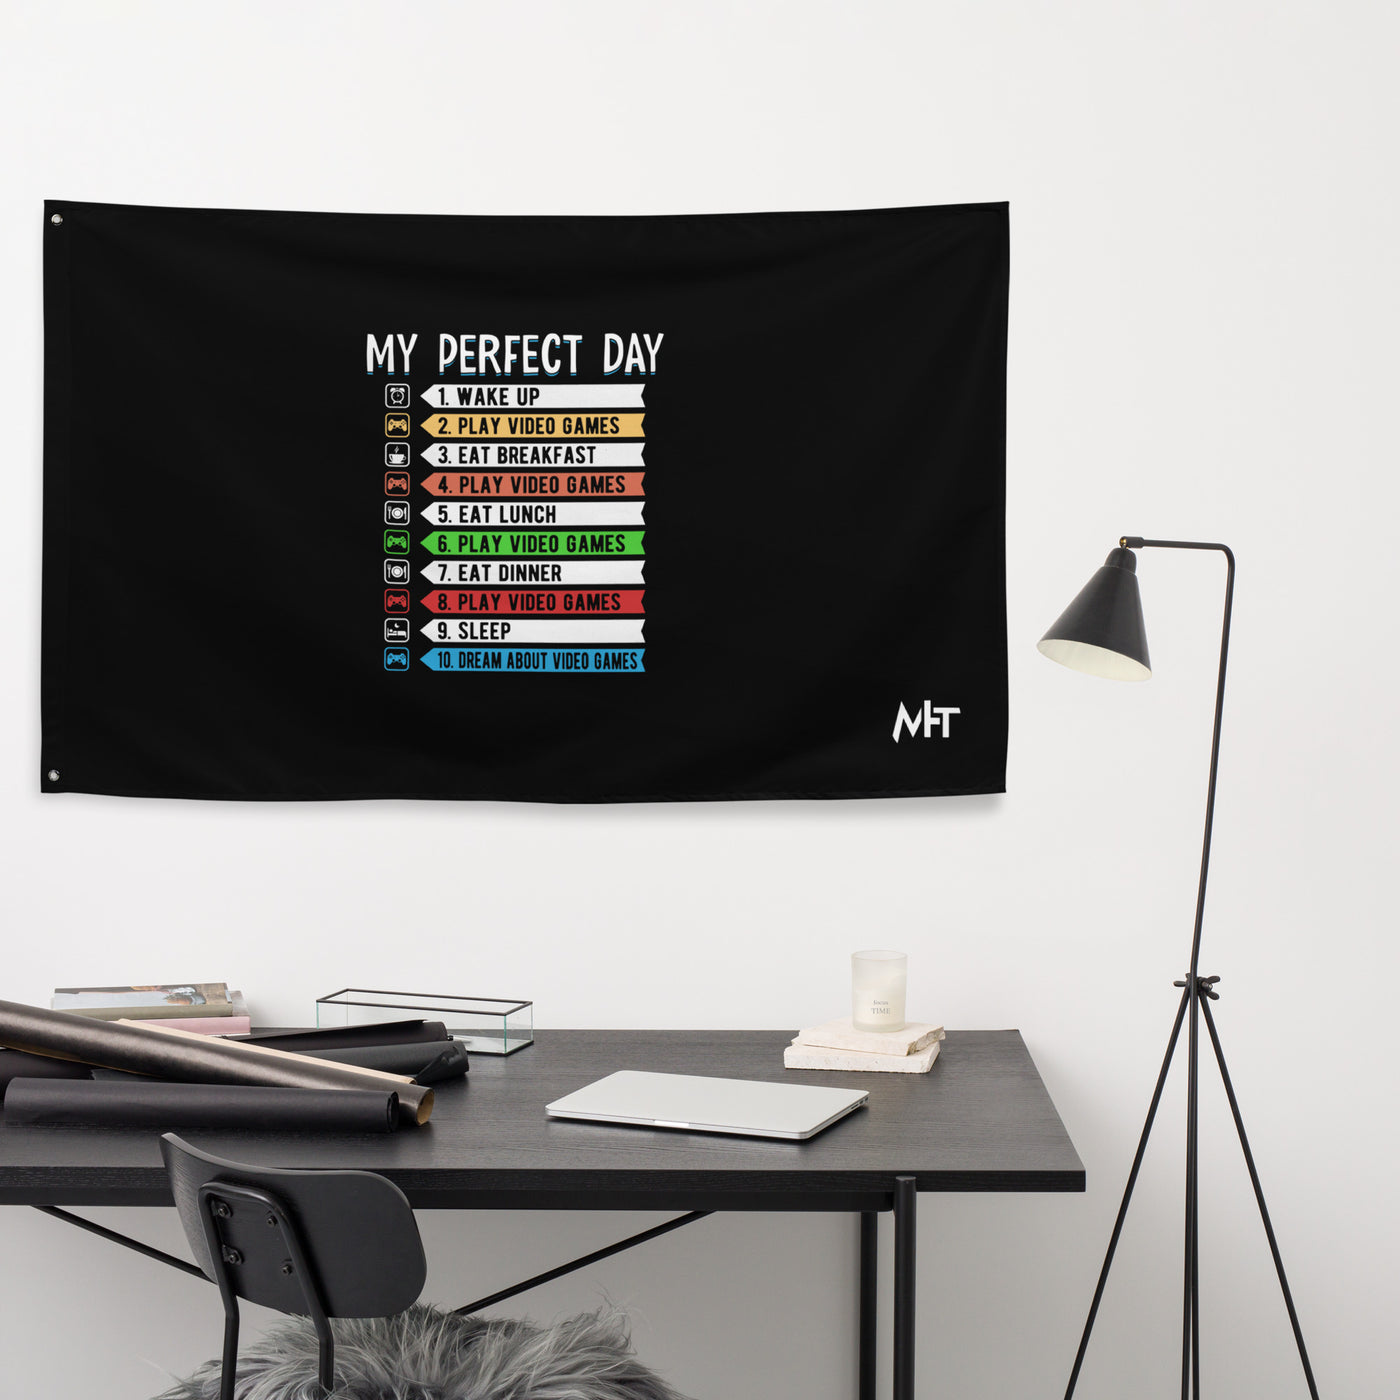 My perfect day wake up play video game Flag